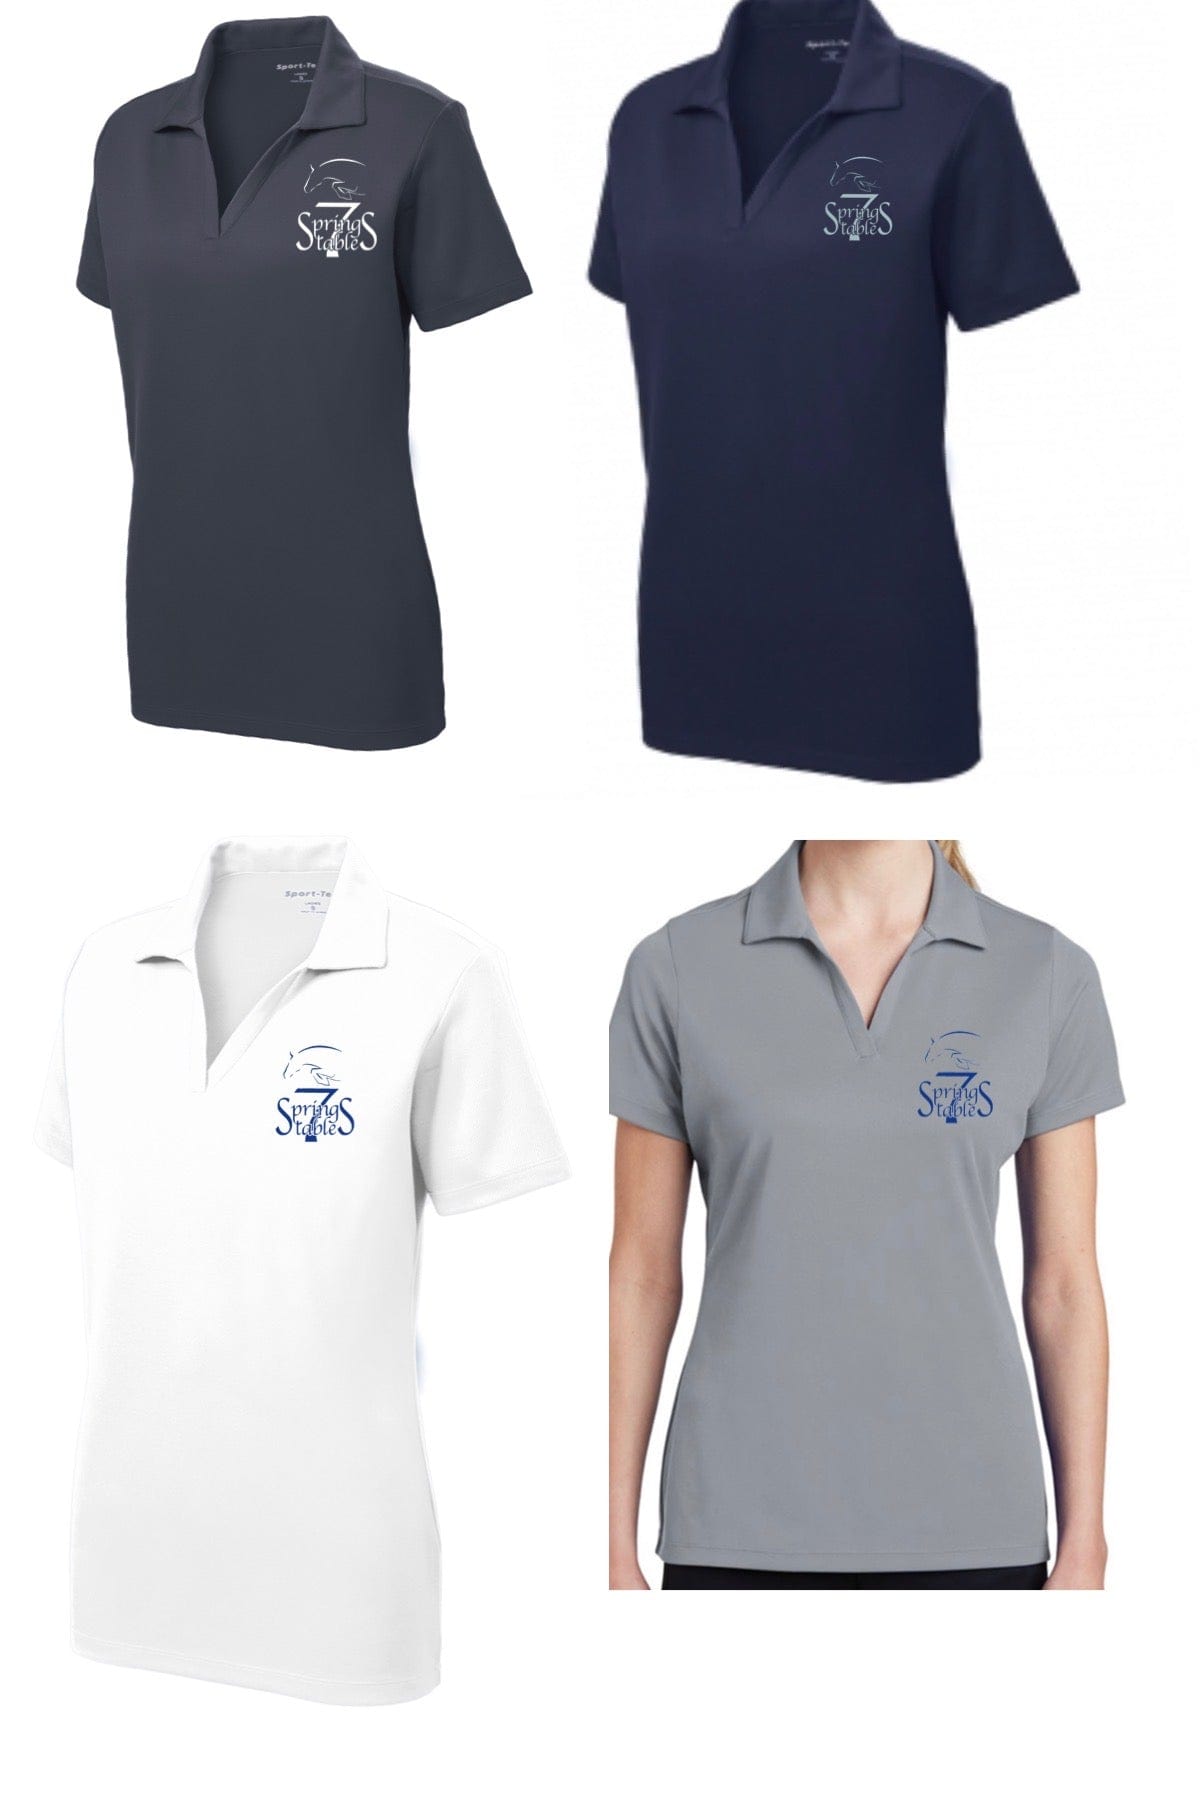 Products - Equestrian Team Apparel